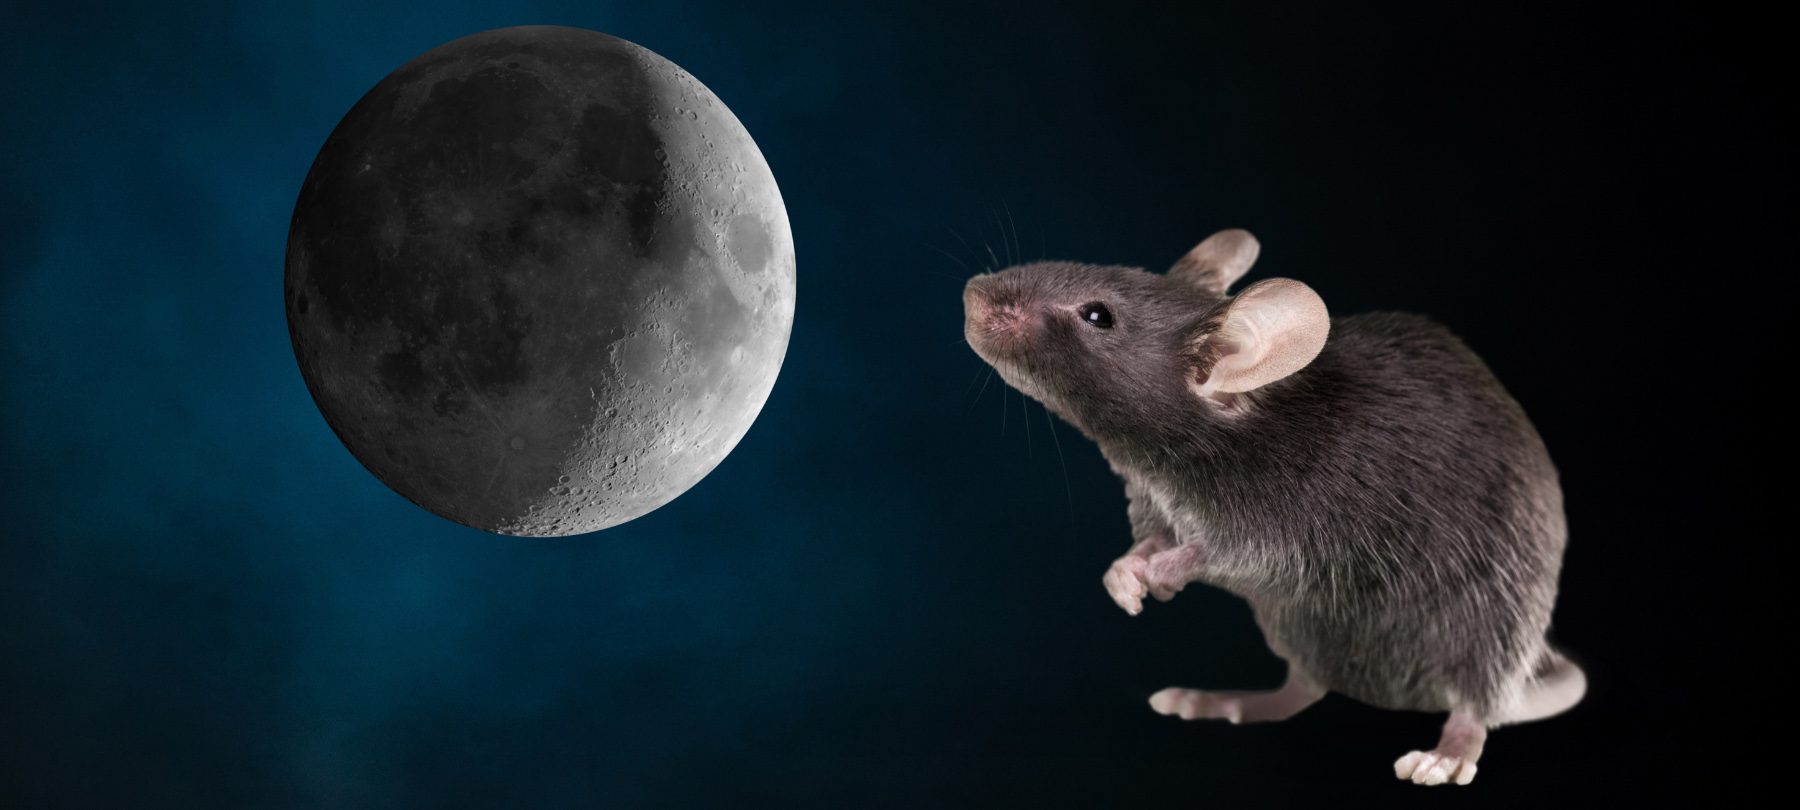 "Of Mice & Moonstones" by Cynthia Renée Marcusson